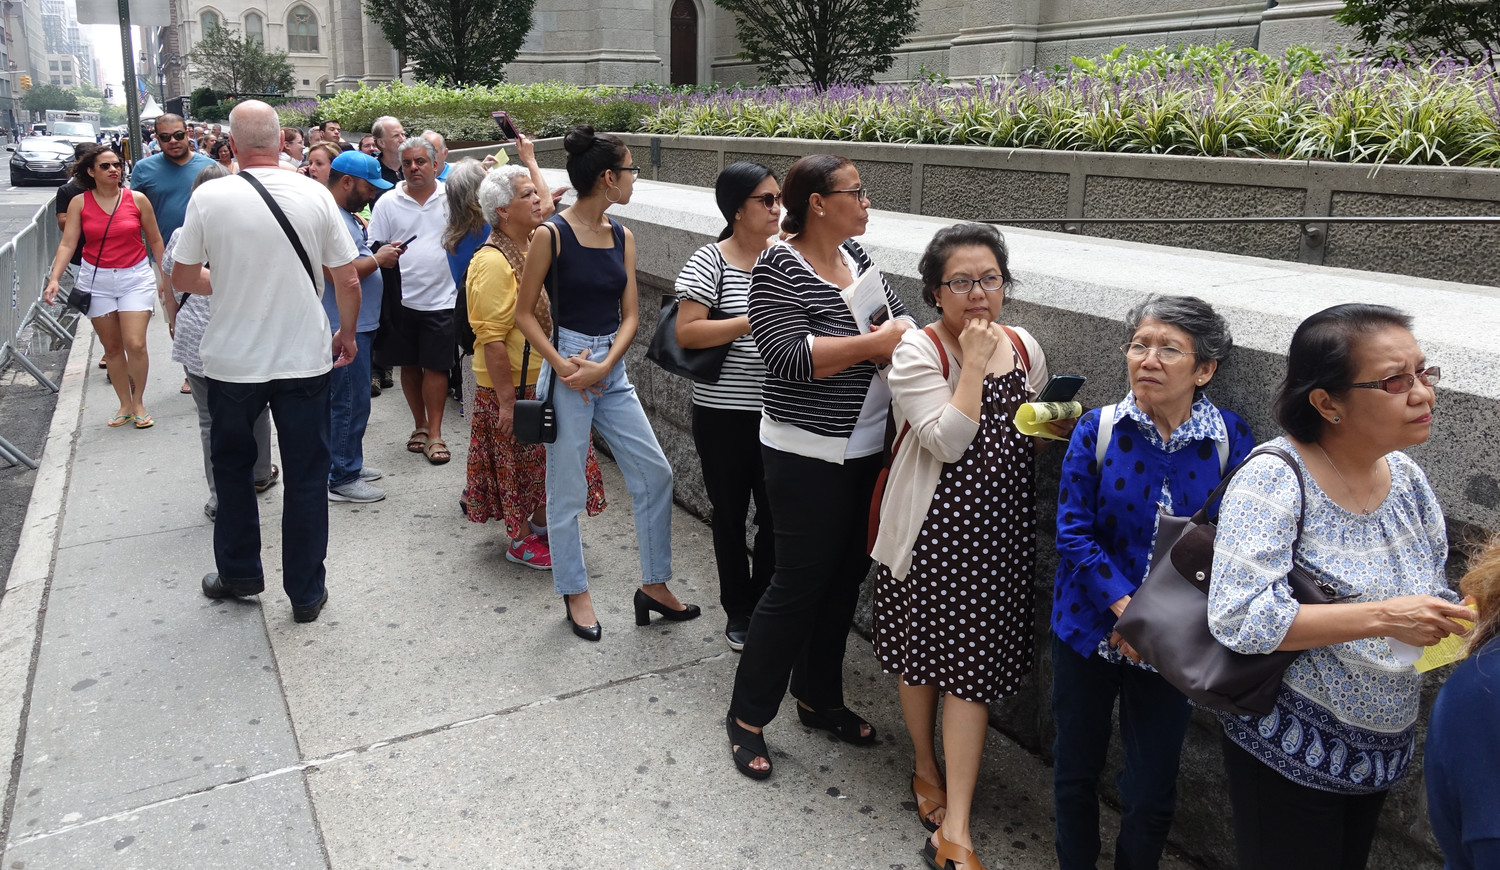 Devotees of St. Padre Pio wait to file into St. Patrick’s Cathedral from 51st Street Sept. 17 to venerate relics of the Italian-born saint on display in the Lady Chapel. The line extended around the corner to Madison Avenue, in front of the cathedral’s Parish House.